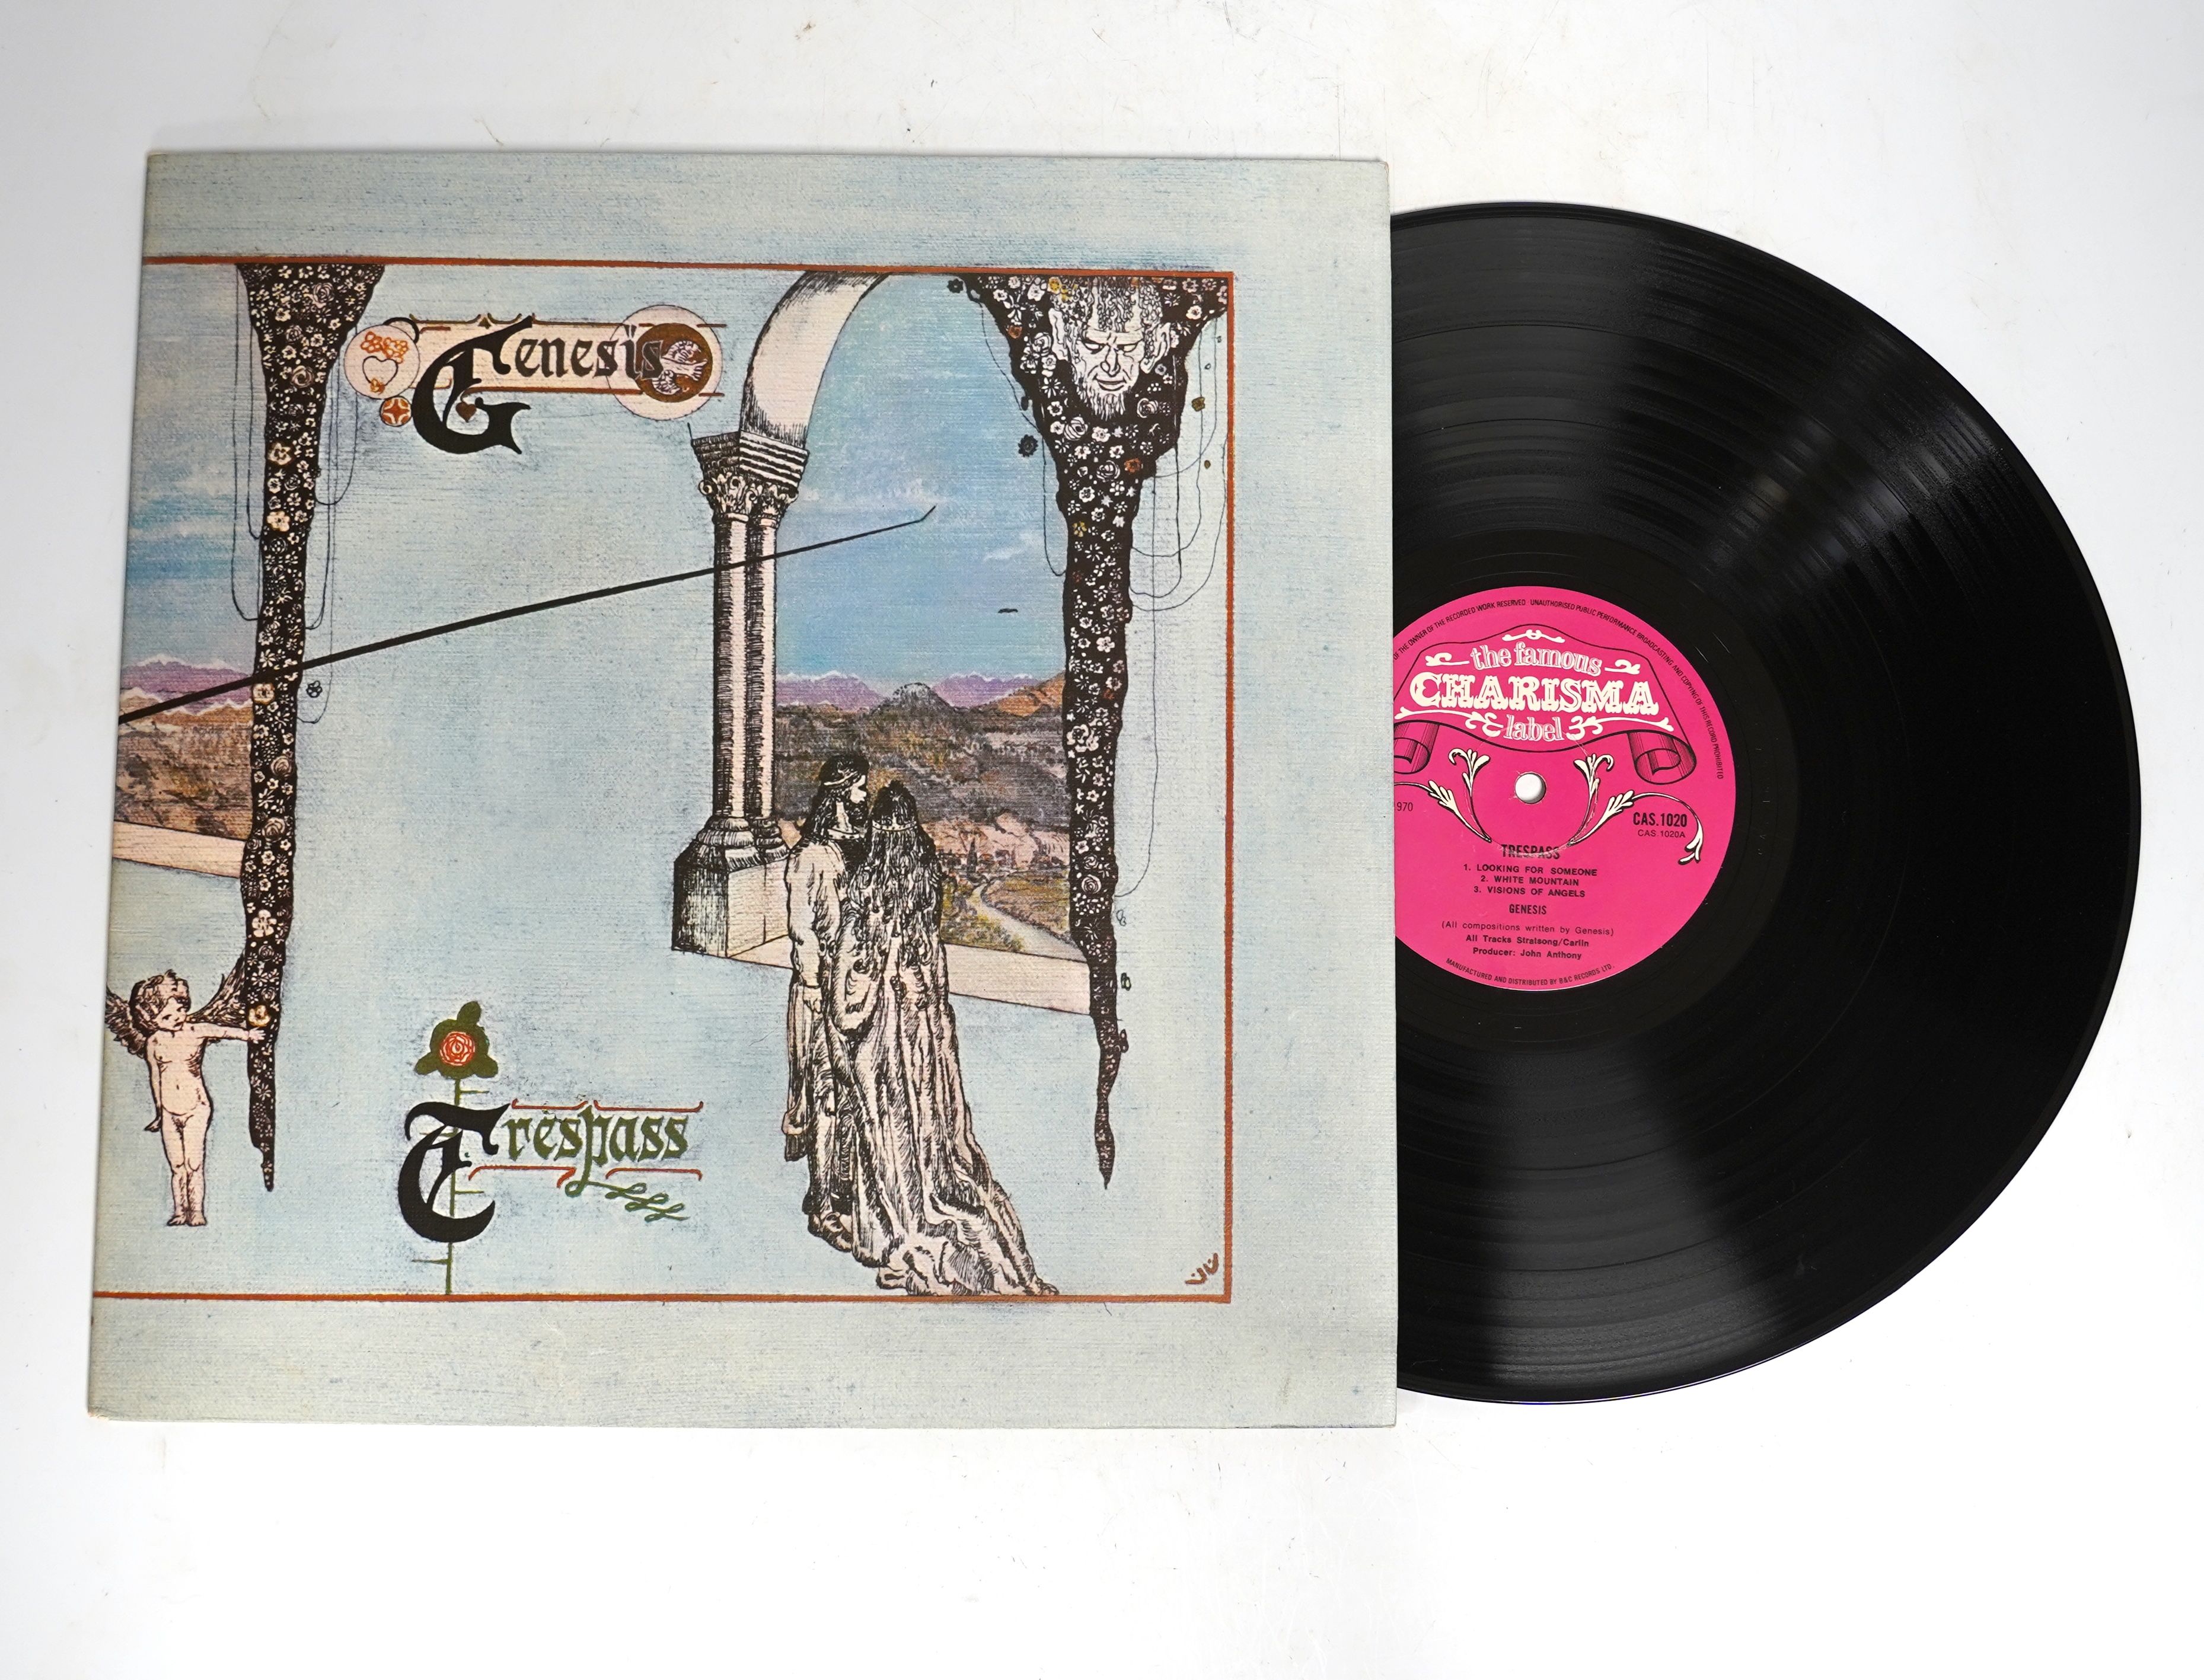 Genesis; Trespass LP record album, on pink scroll Charisma label, CAS.1020, with inner lyric sheet and textured gatefold cover